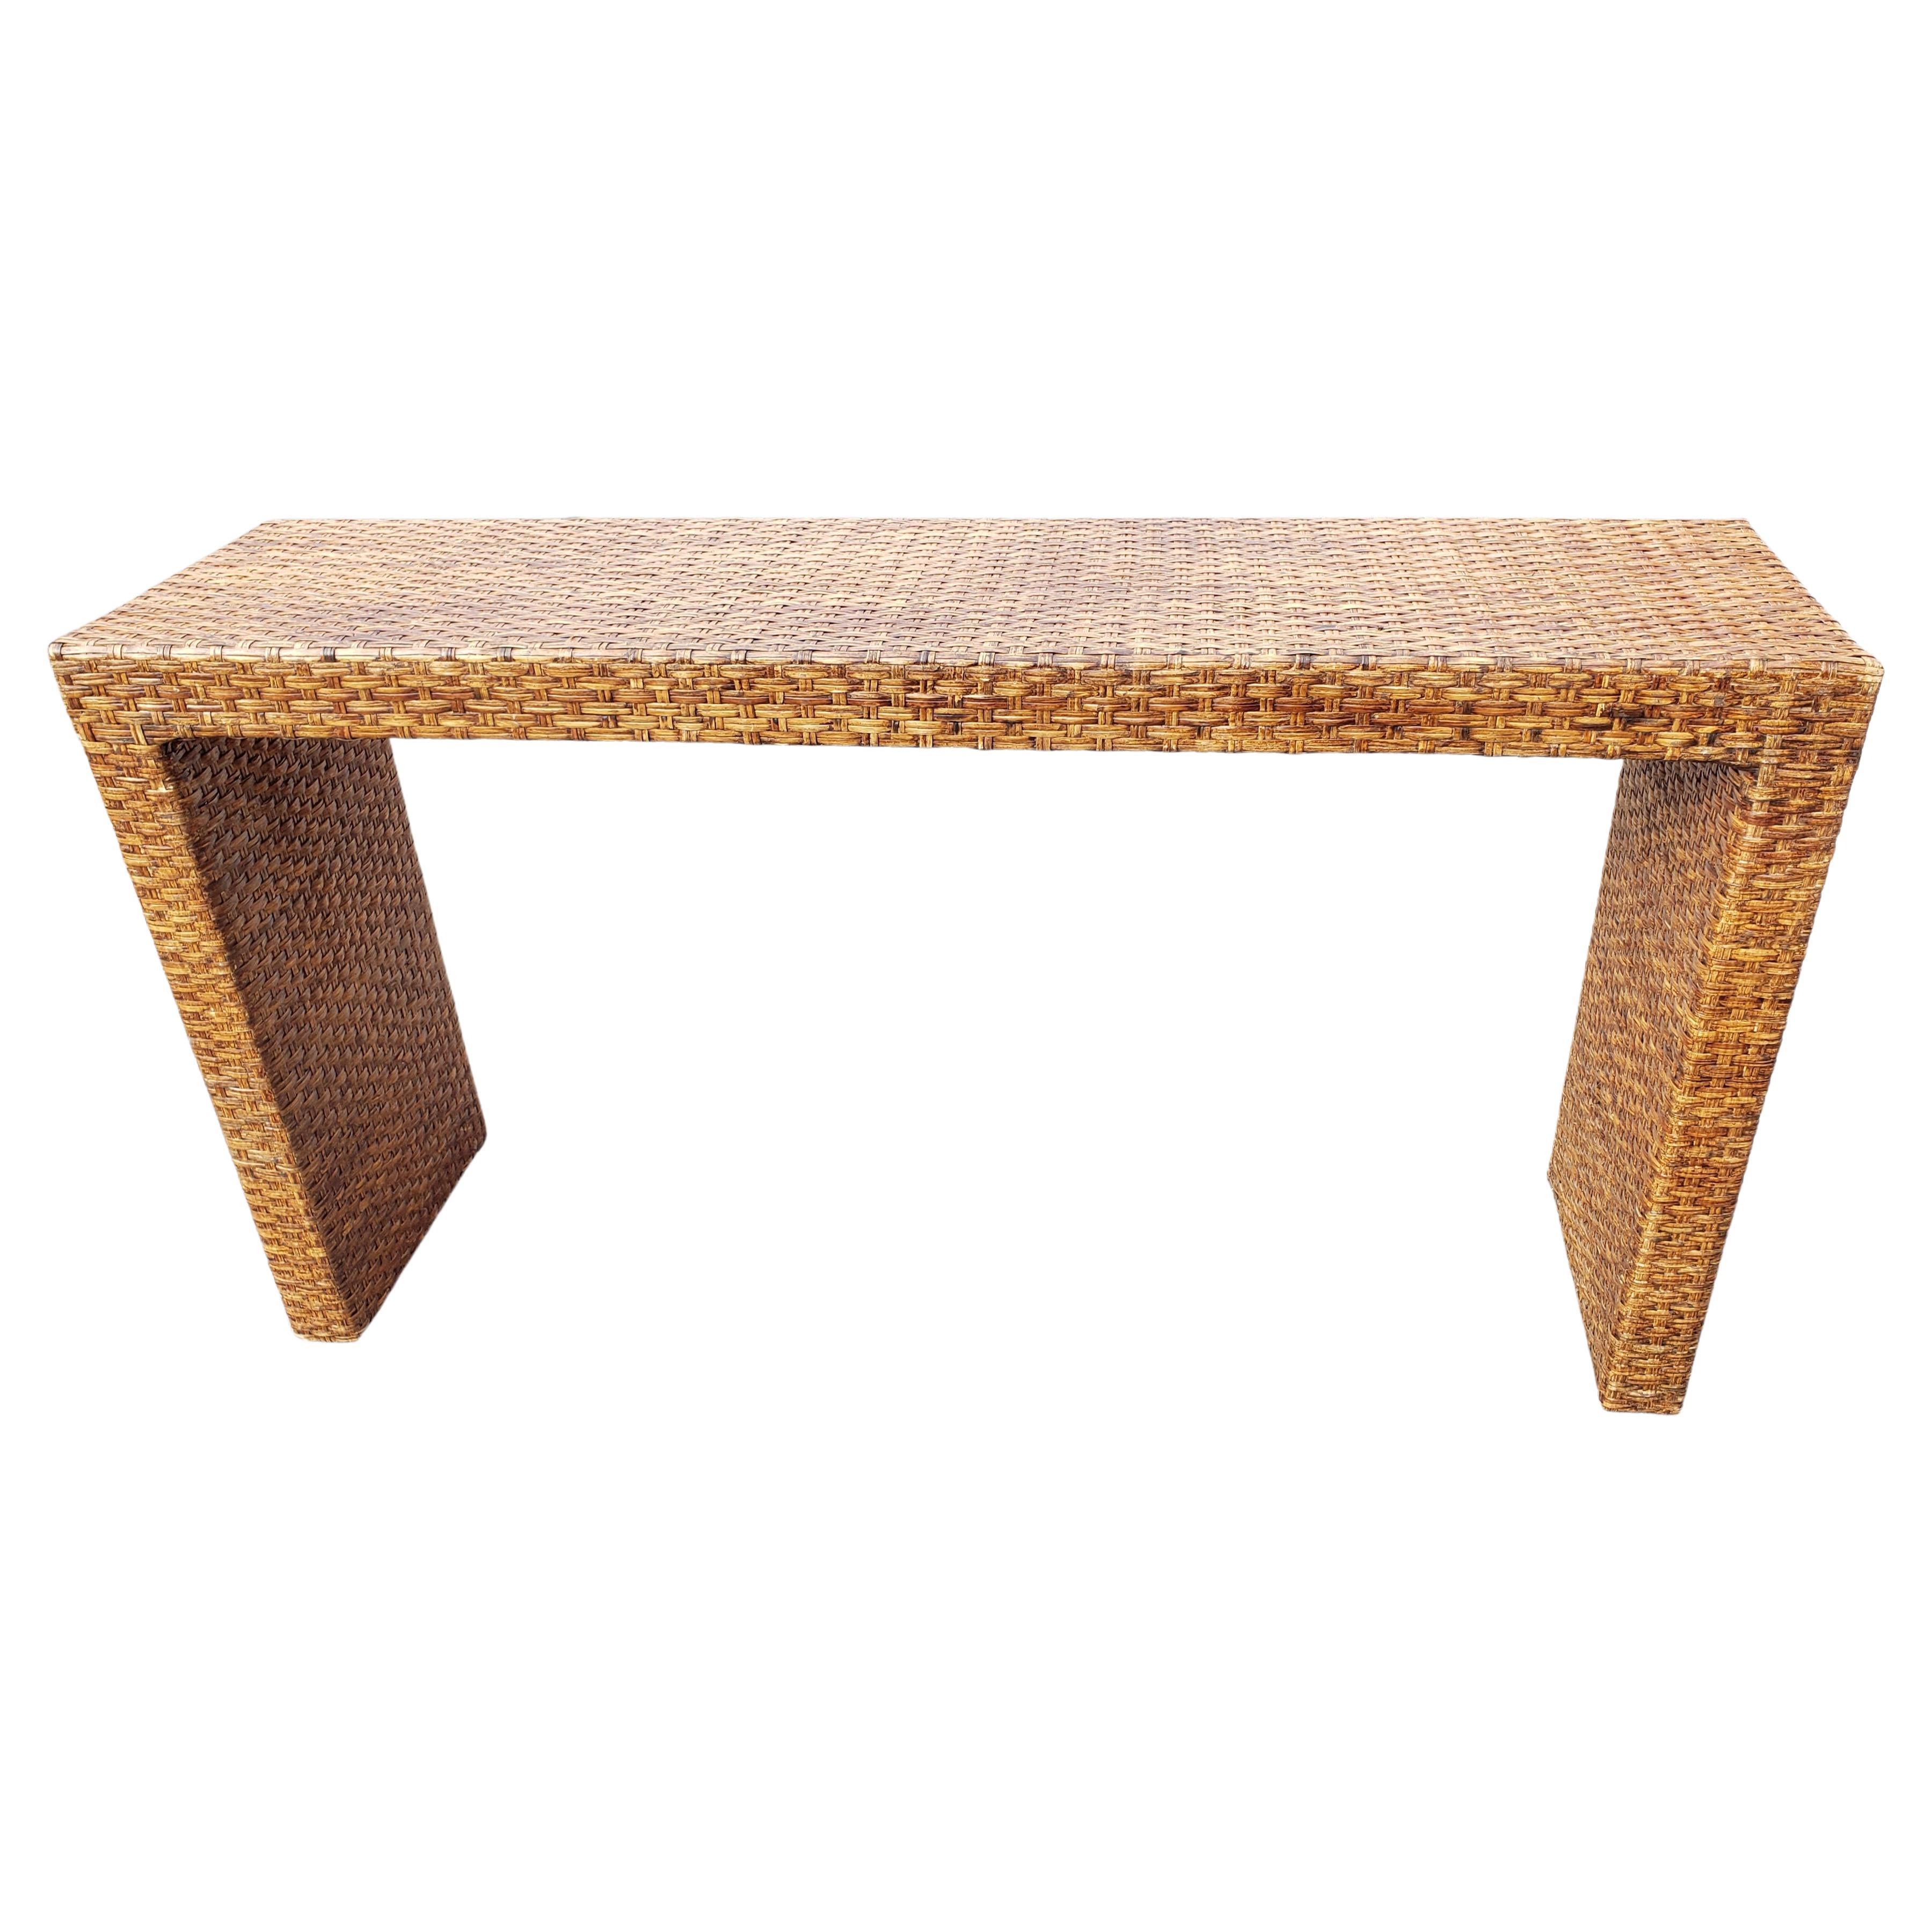 Woven Wicker Parsons Style Console Table Sofa Table with Glass Top, Circa 1980s